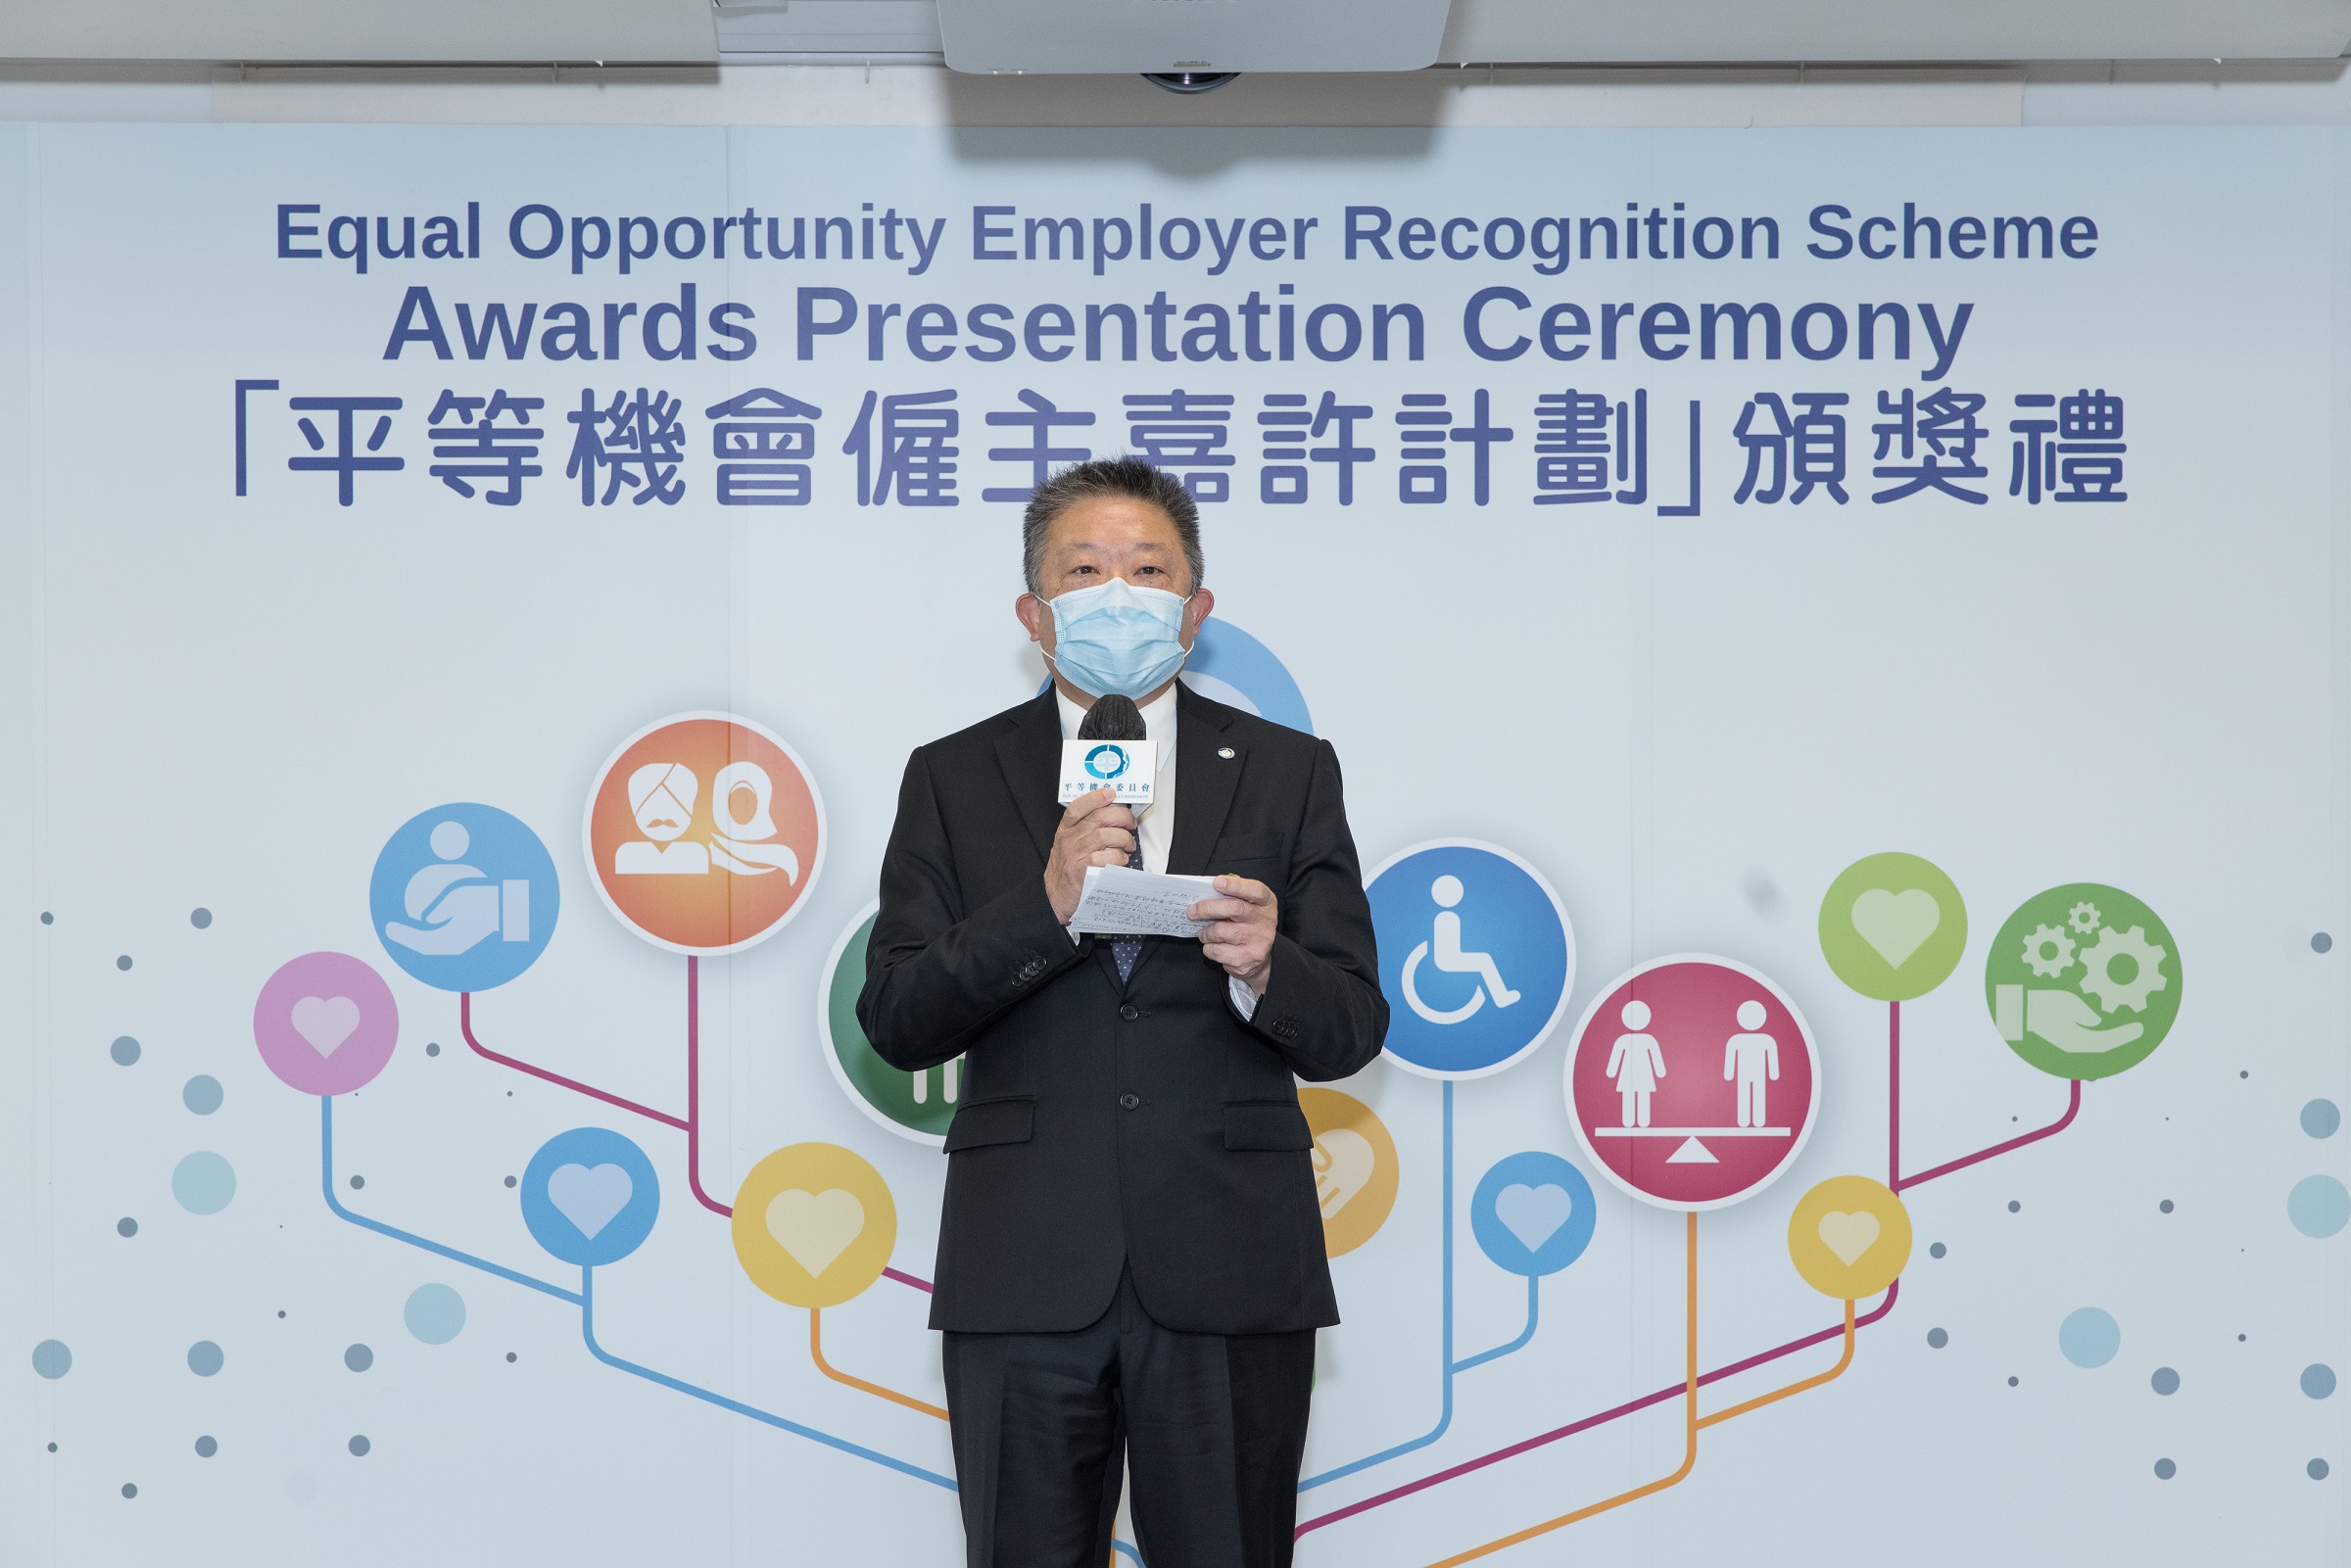 Photo of EOC Chairperson Mr Ricky CHU Man-kin speaking at the awards presentation ceremony of the Equal Opportunity Employer Recognition Scheme.